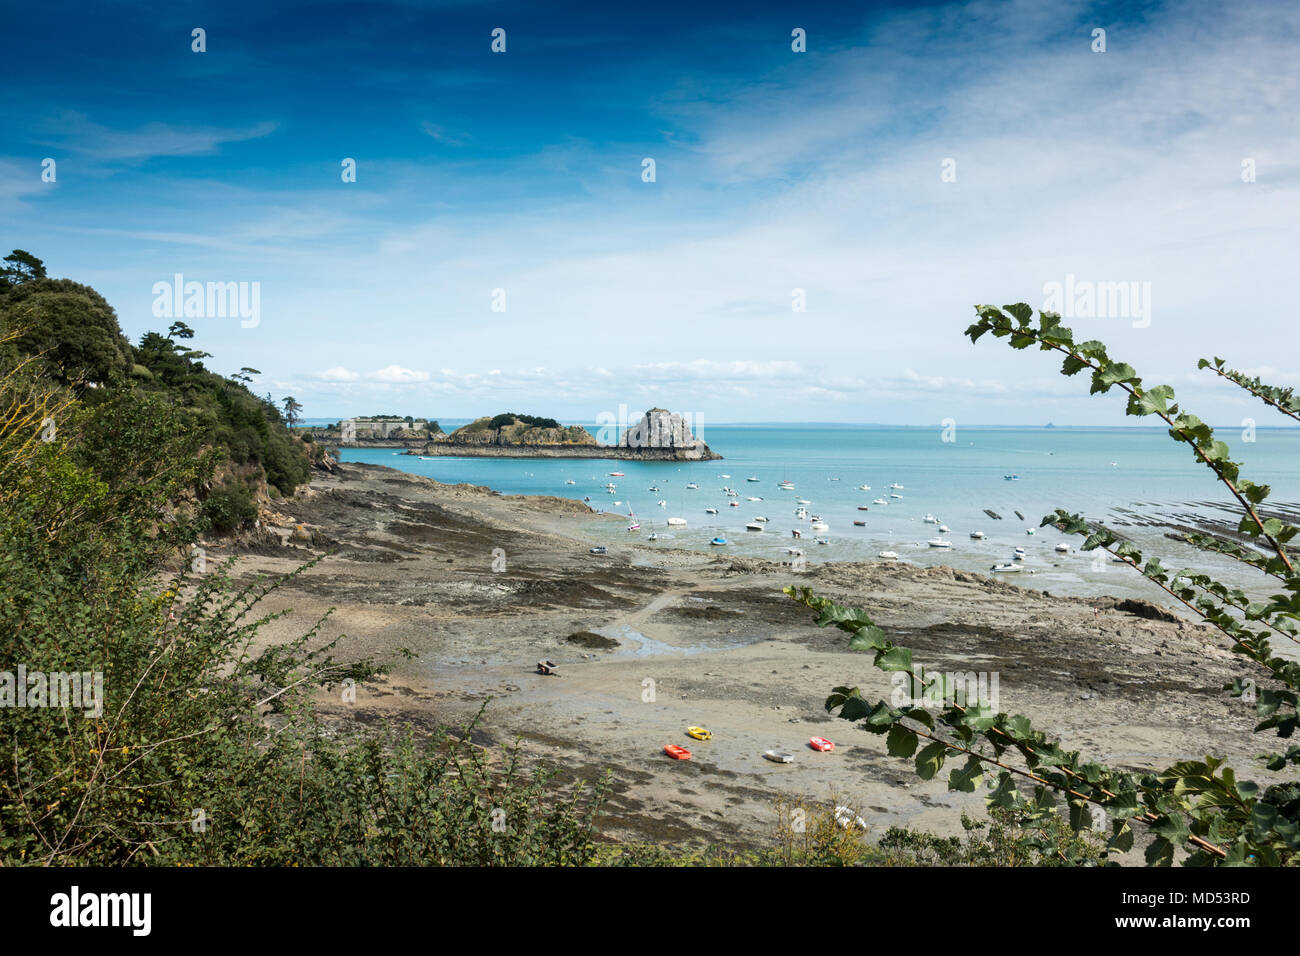 Scenic view of the island from a far off distance, Brittany, France, Europe Stock Photo